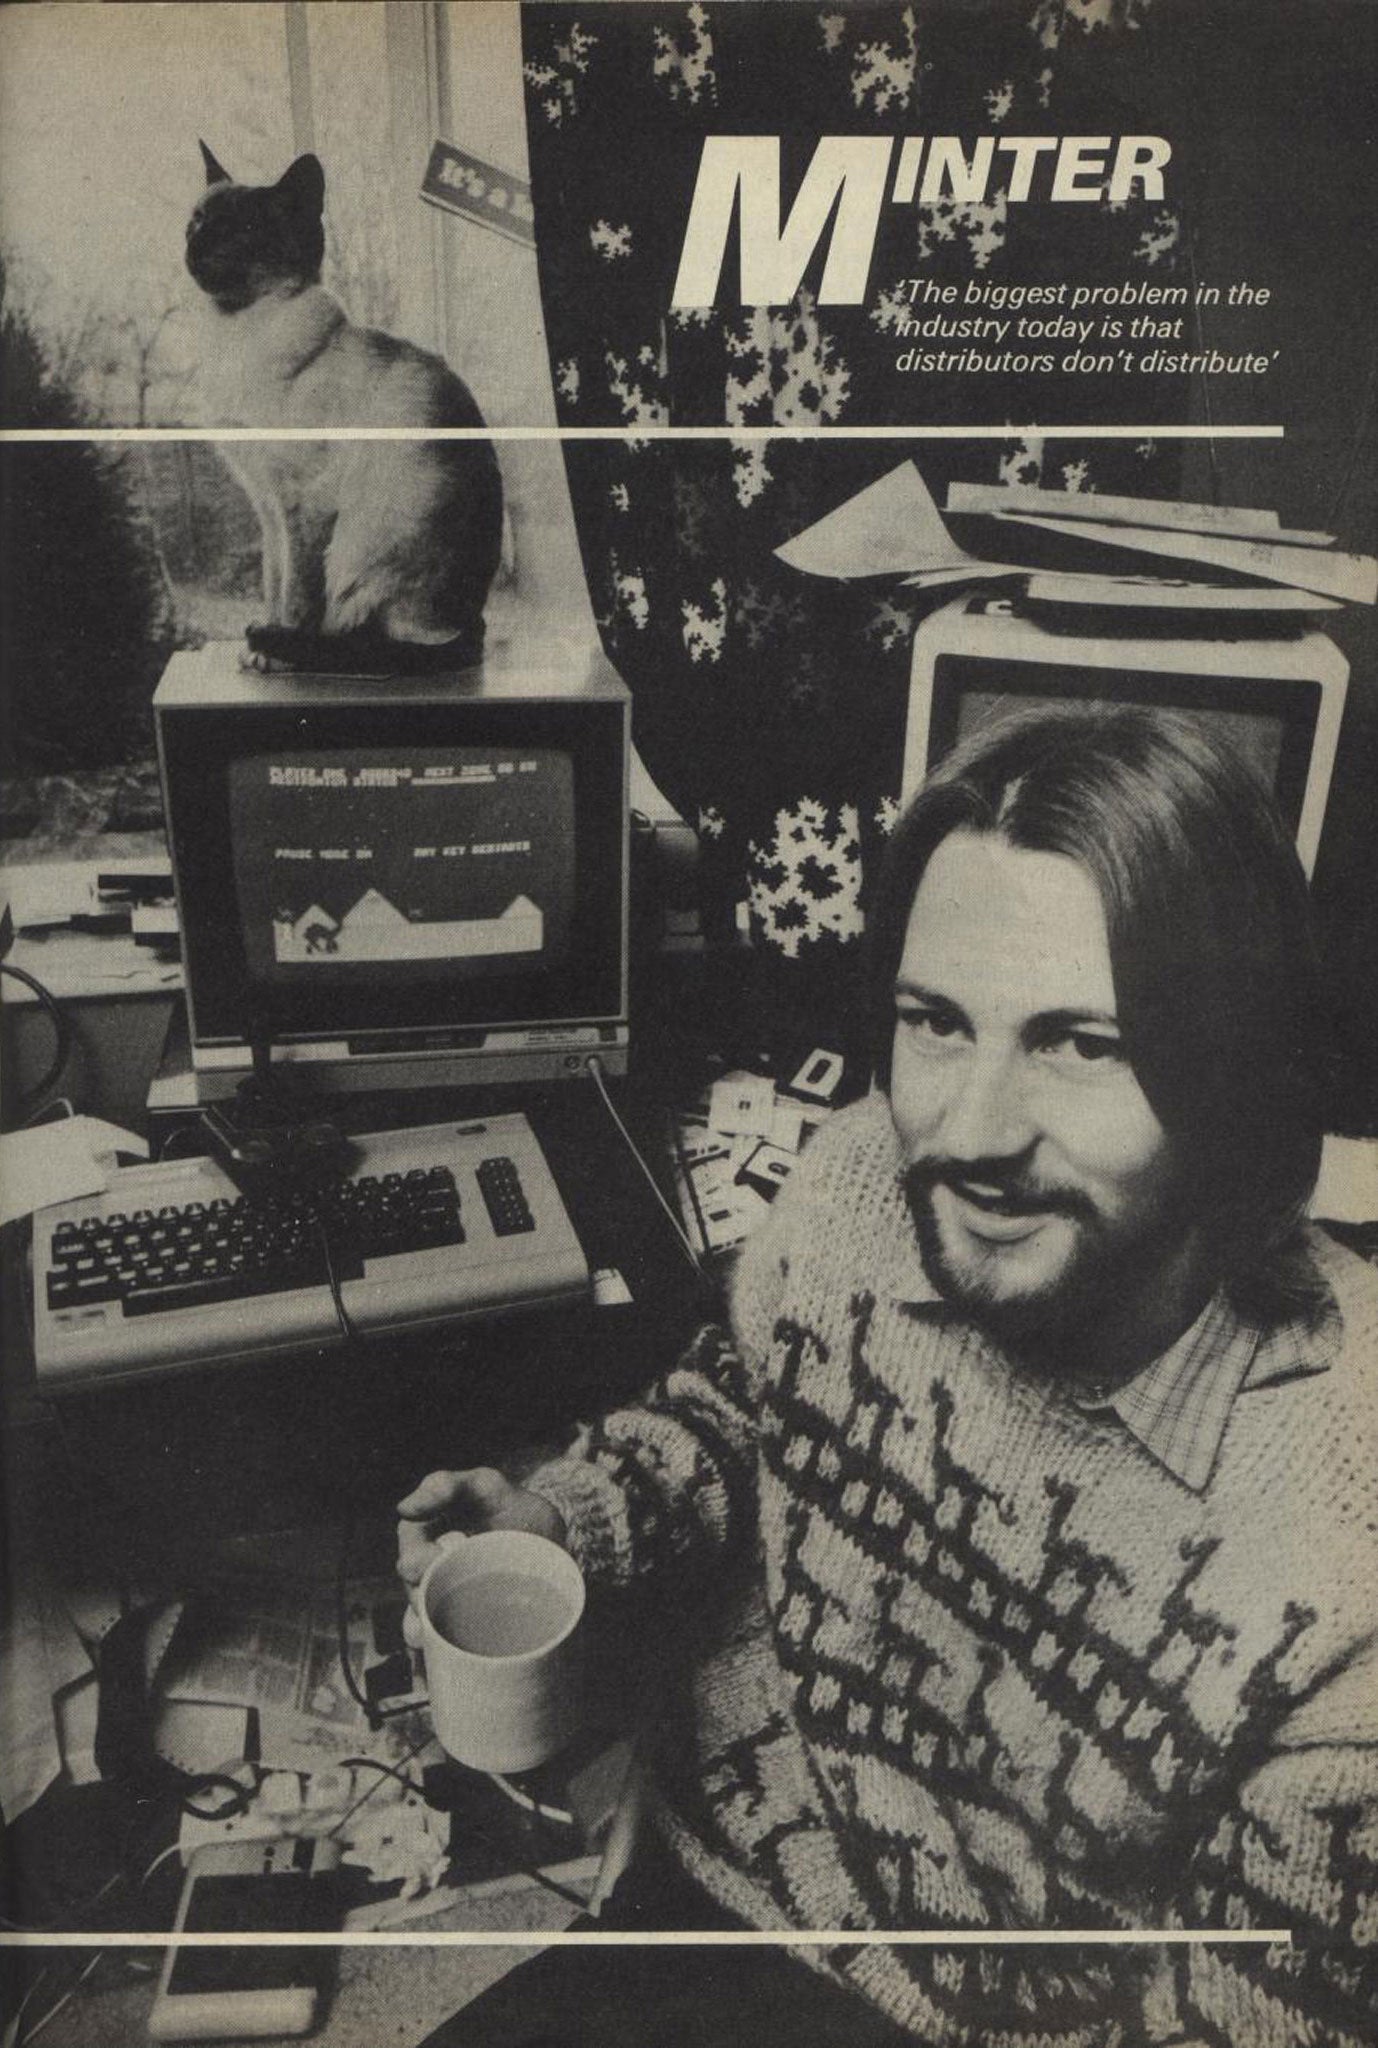 Programmer Jeff Minter founded software house Llamasoft, whose earliest games included 'Andes Attack'